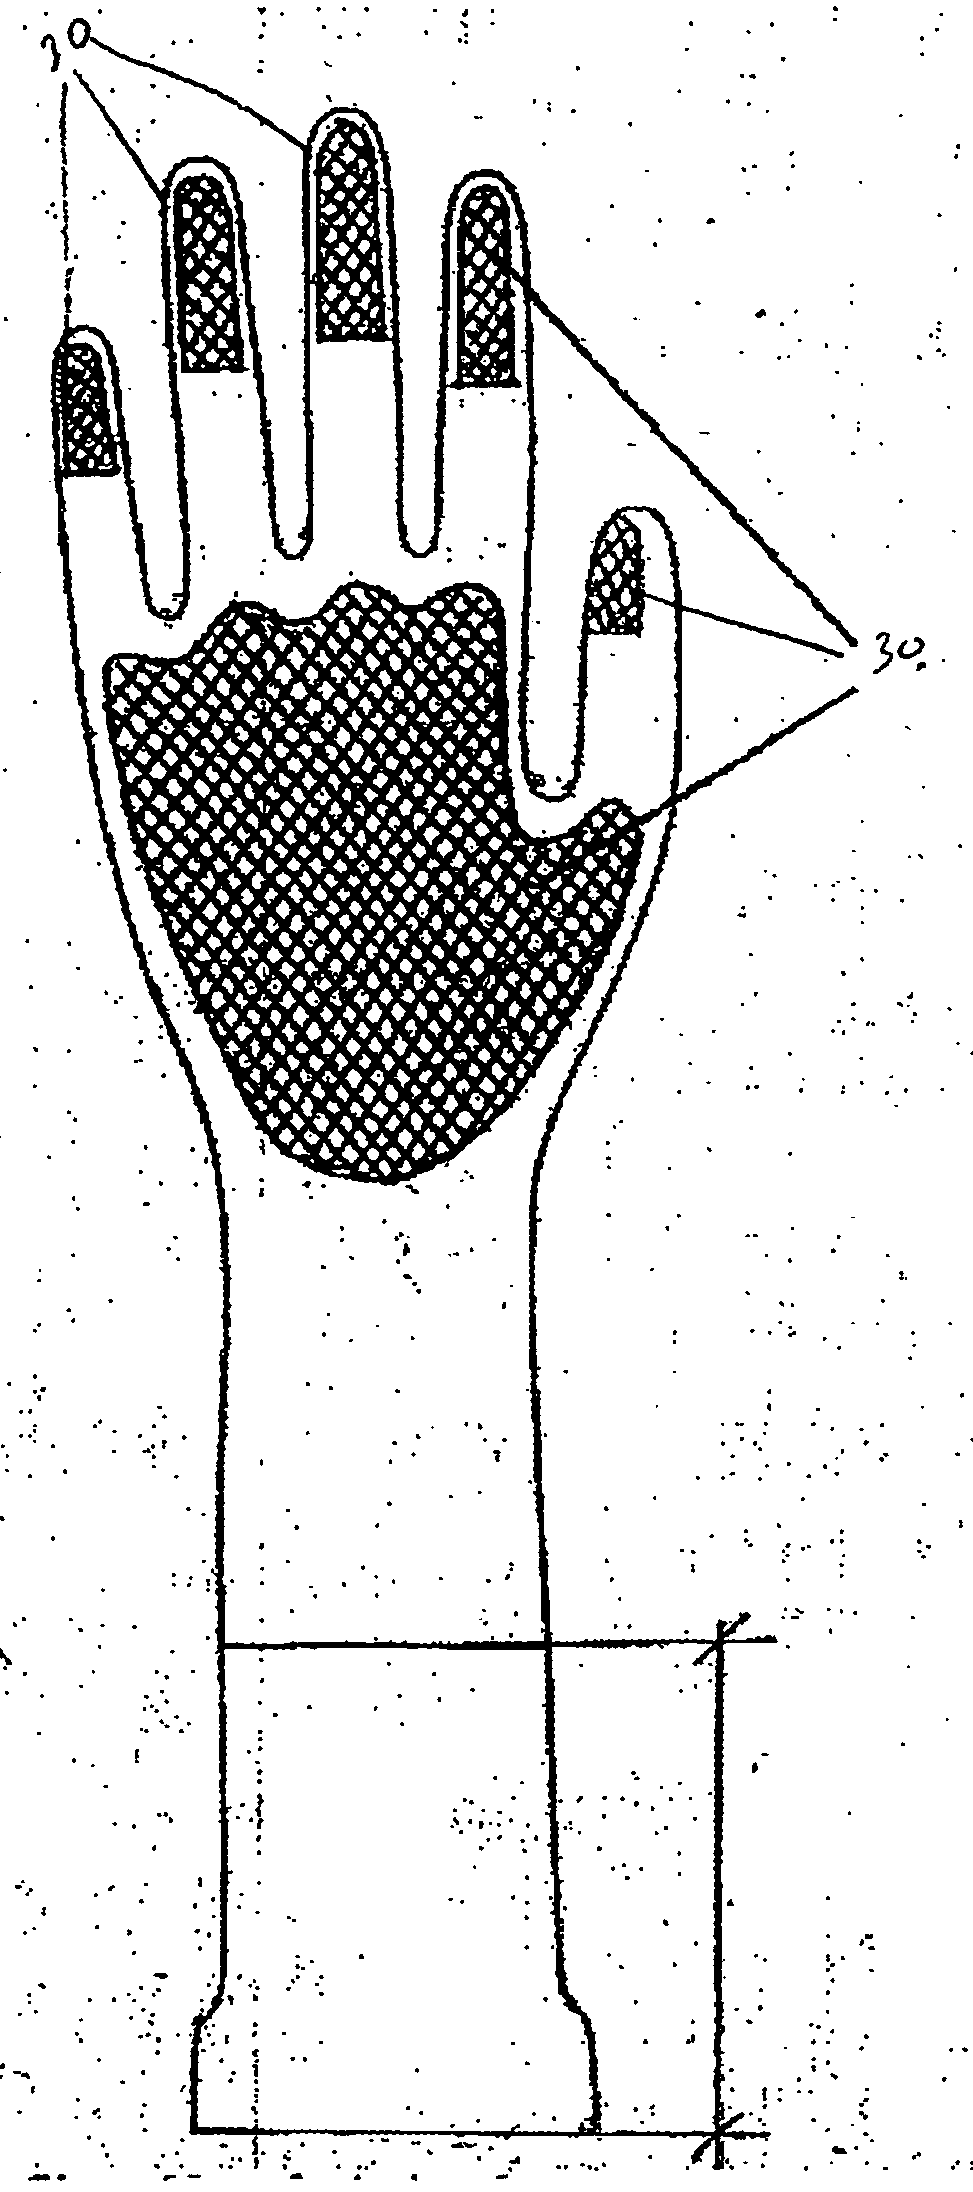 Latex glove with textured outer surface